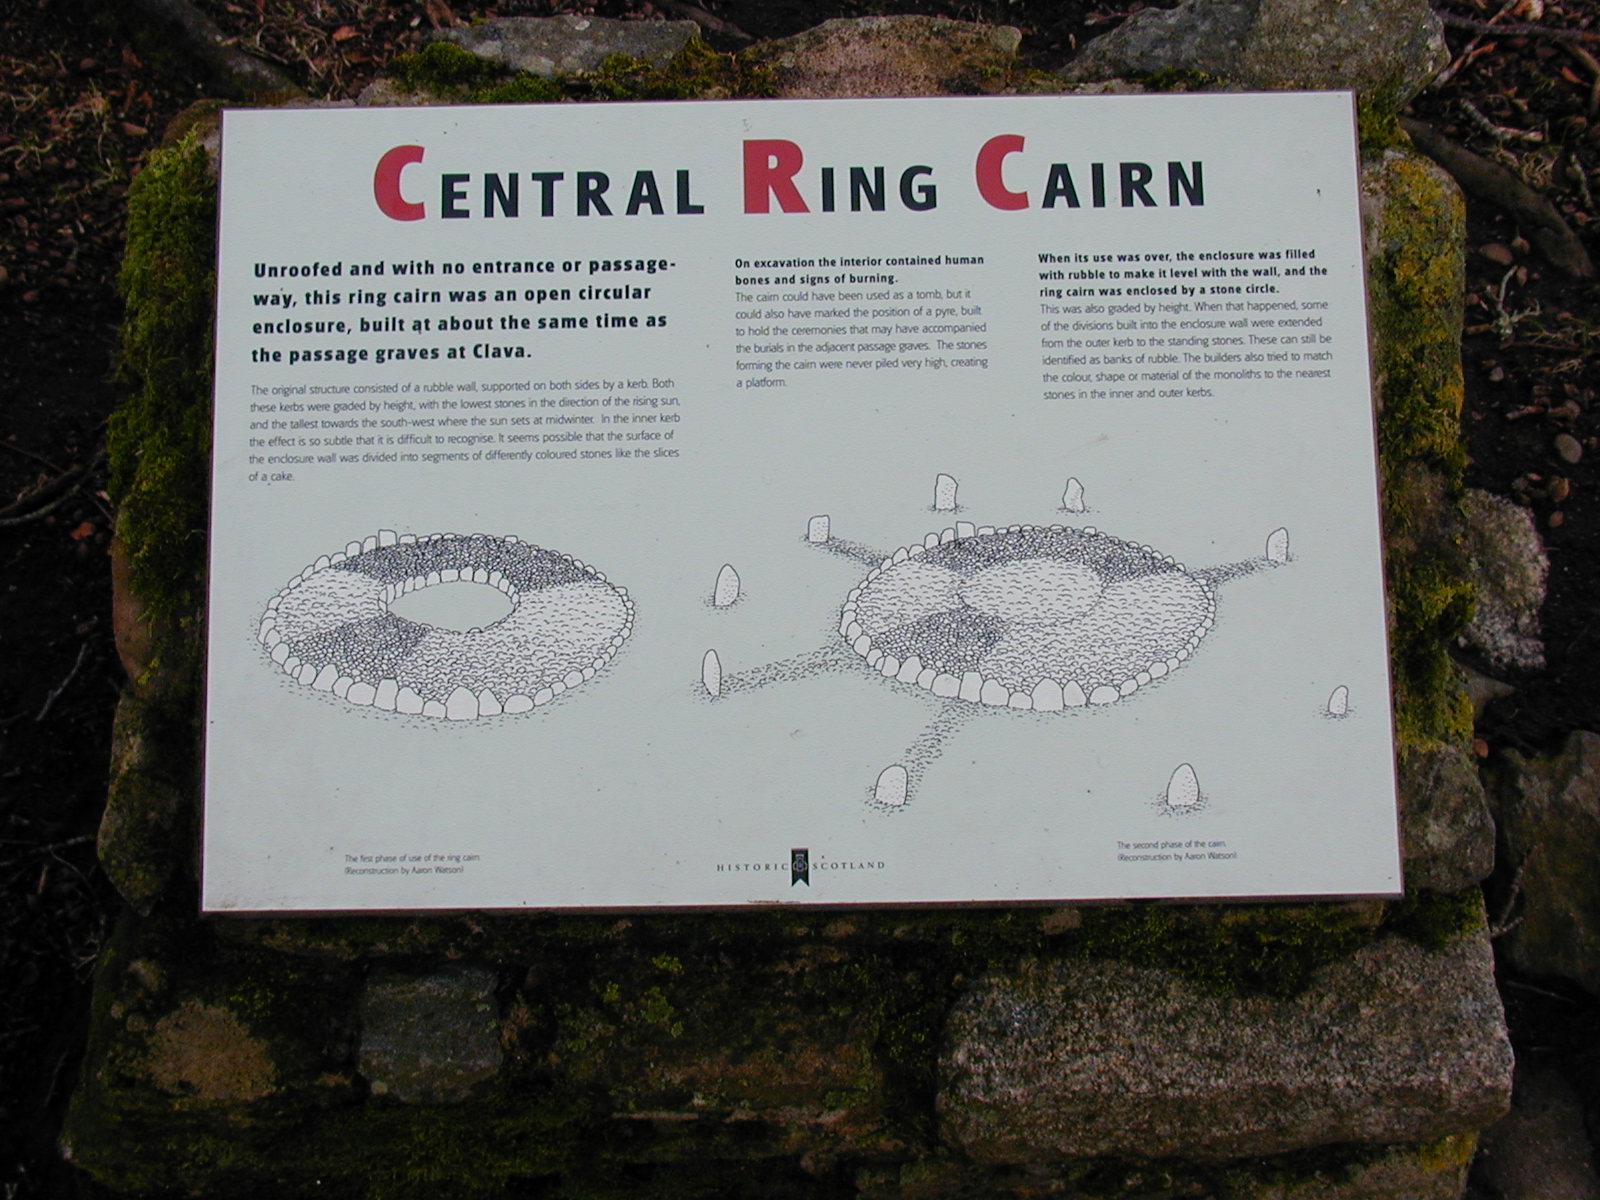 CENTRAL RING CAIRN